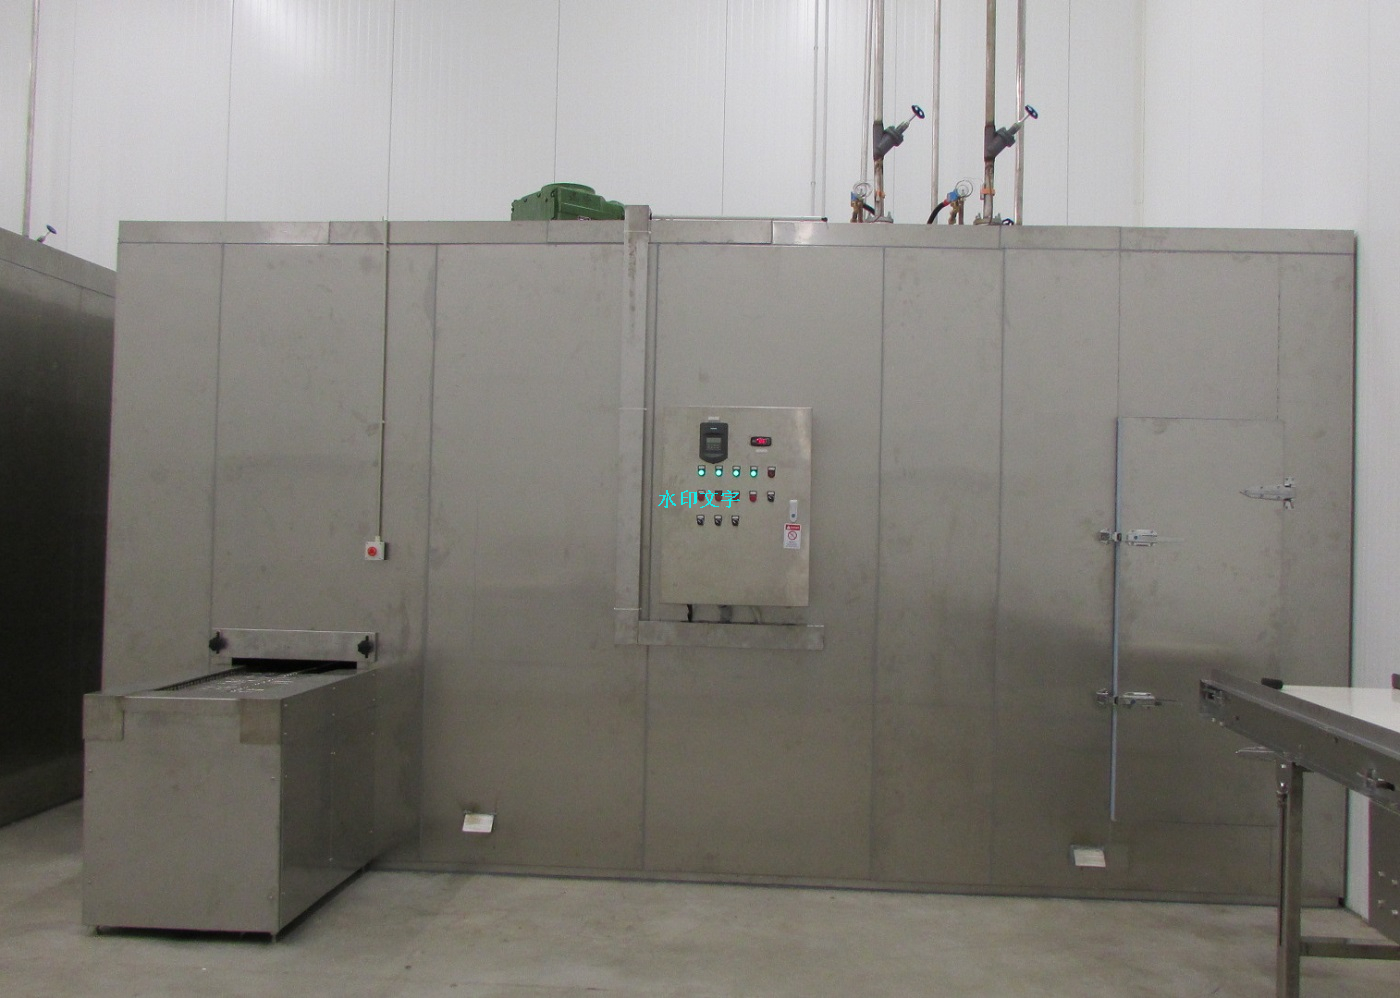 Better Automatic 1000kg/h Spiral Freezer for Frozen Food Export USA